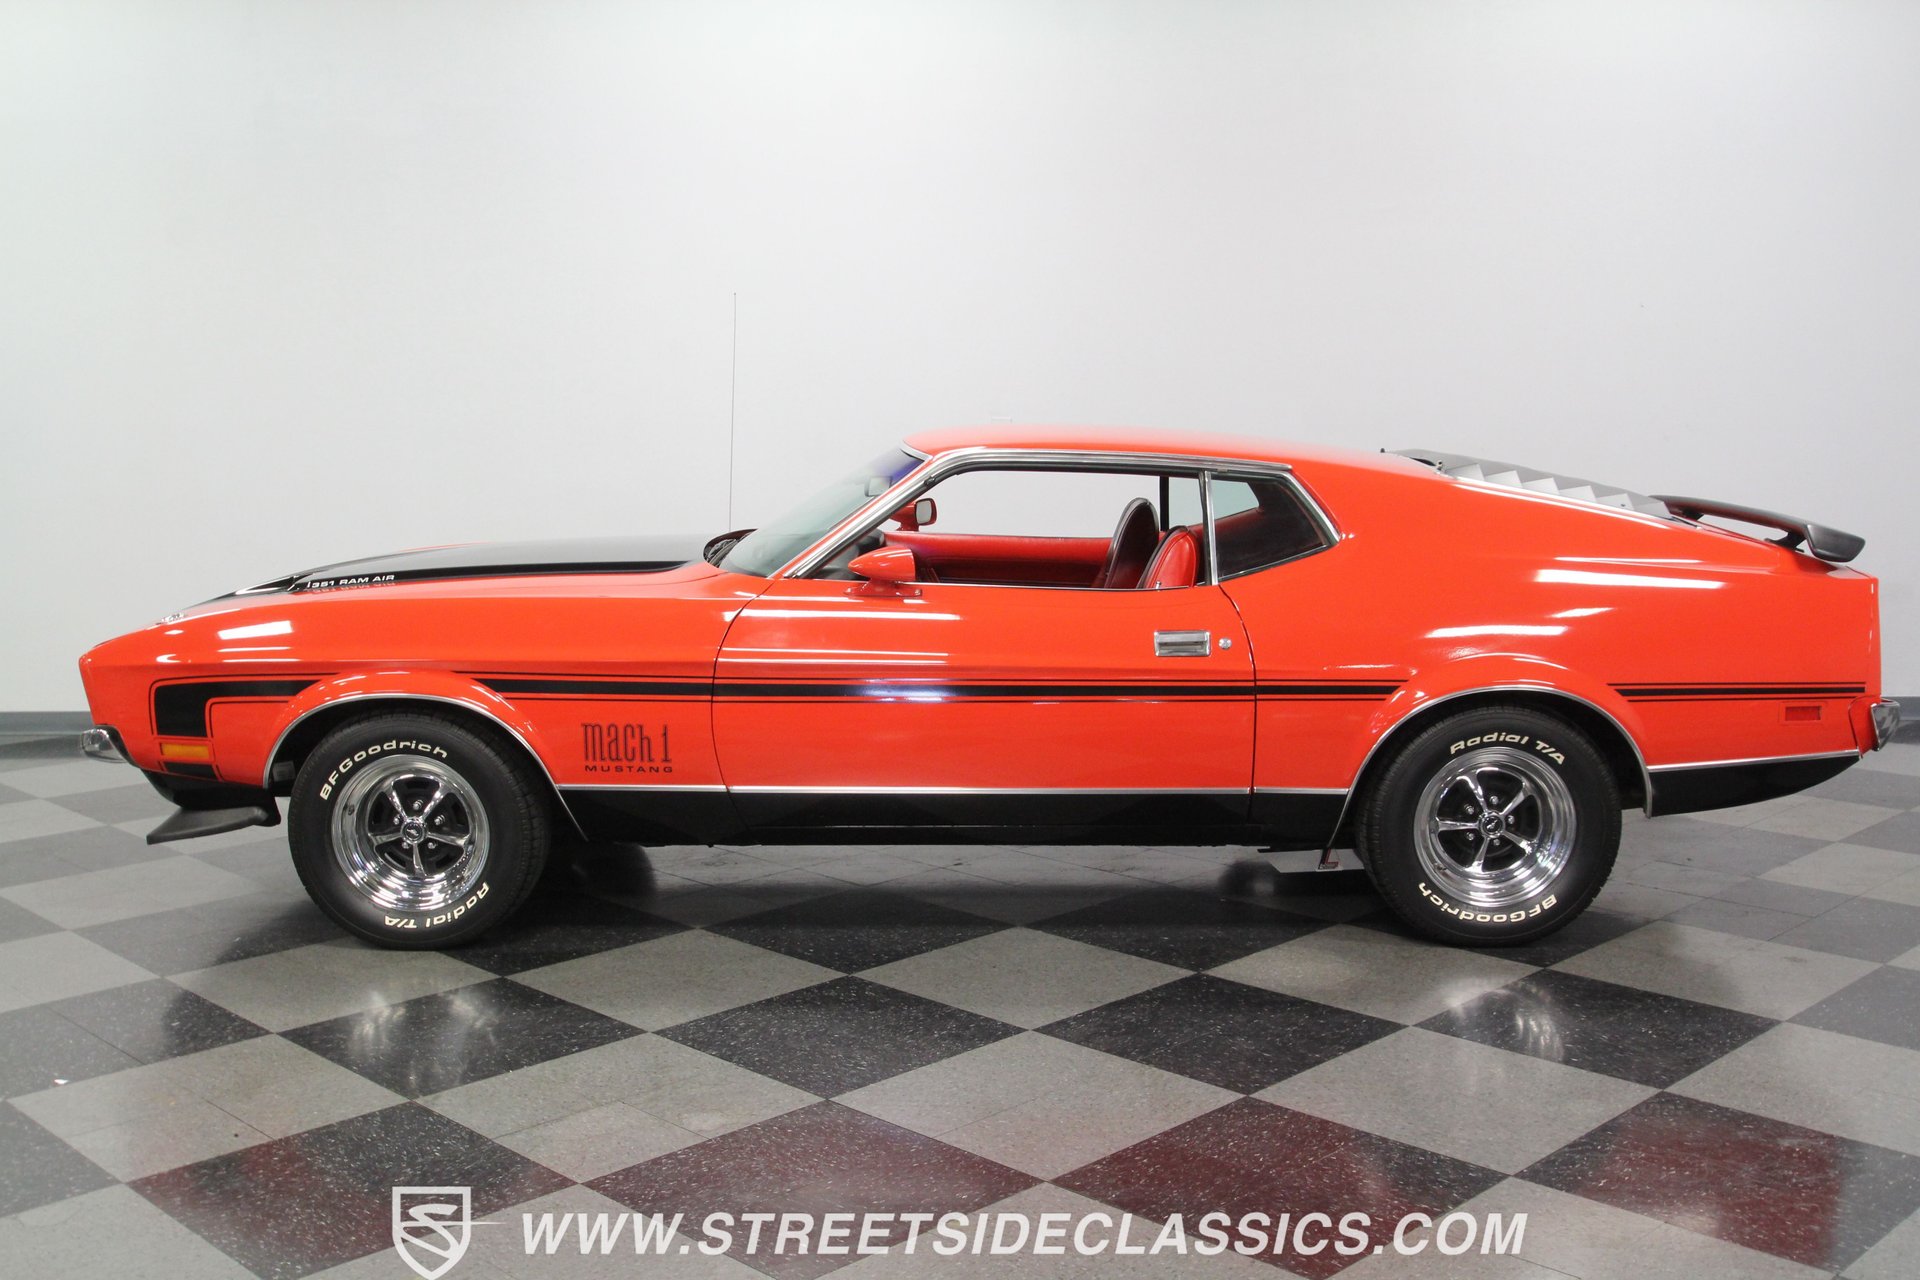 1973 Ford Mustang | Classic Cars for Sale - Streetside Classics